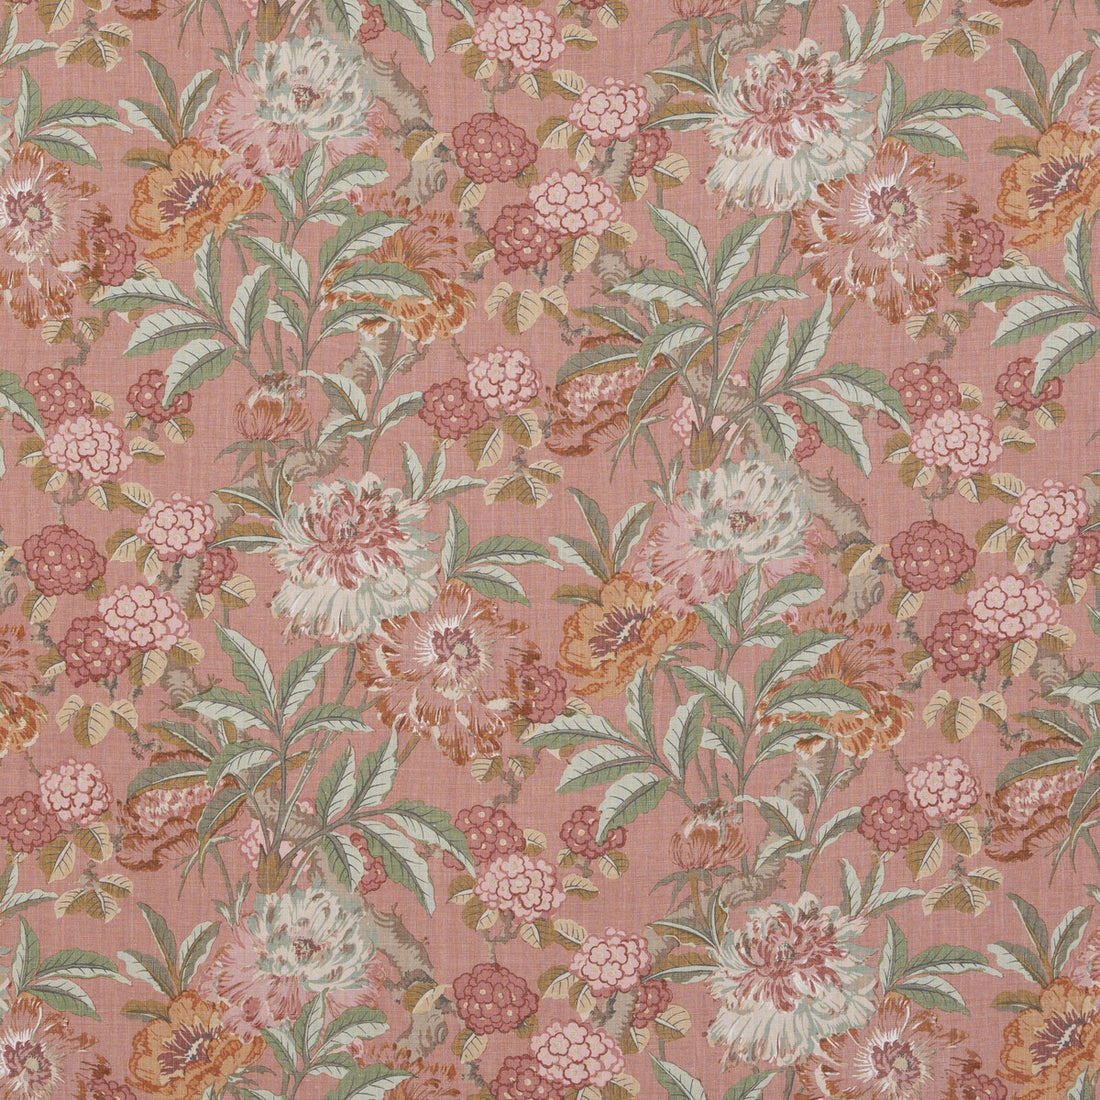 Summer Peony fabric in red color - pattern BP10950.2.0 - by G P &amp; J Baker in the Ashmore collection